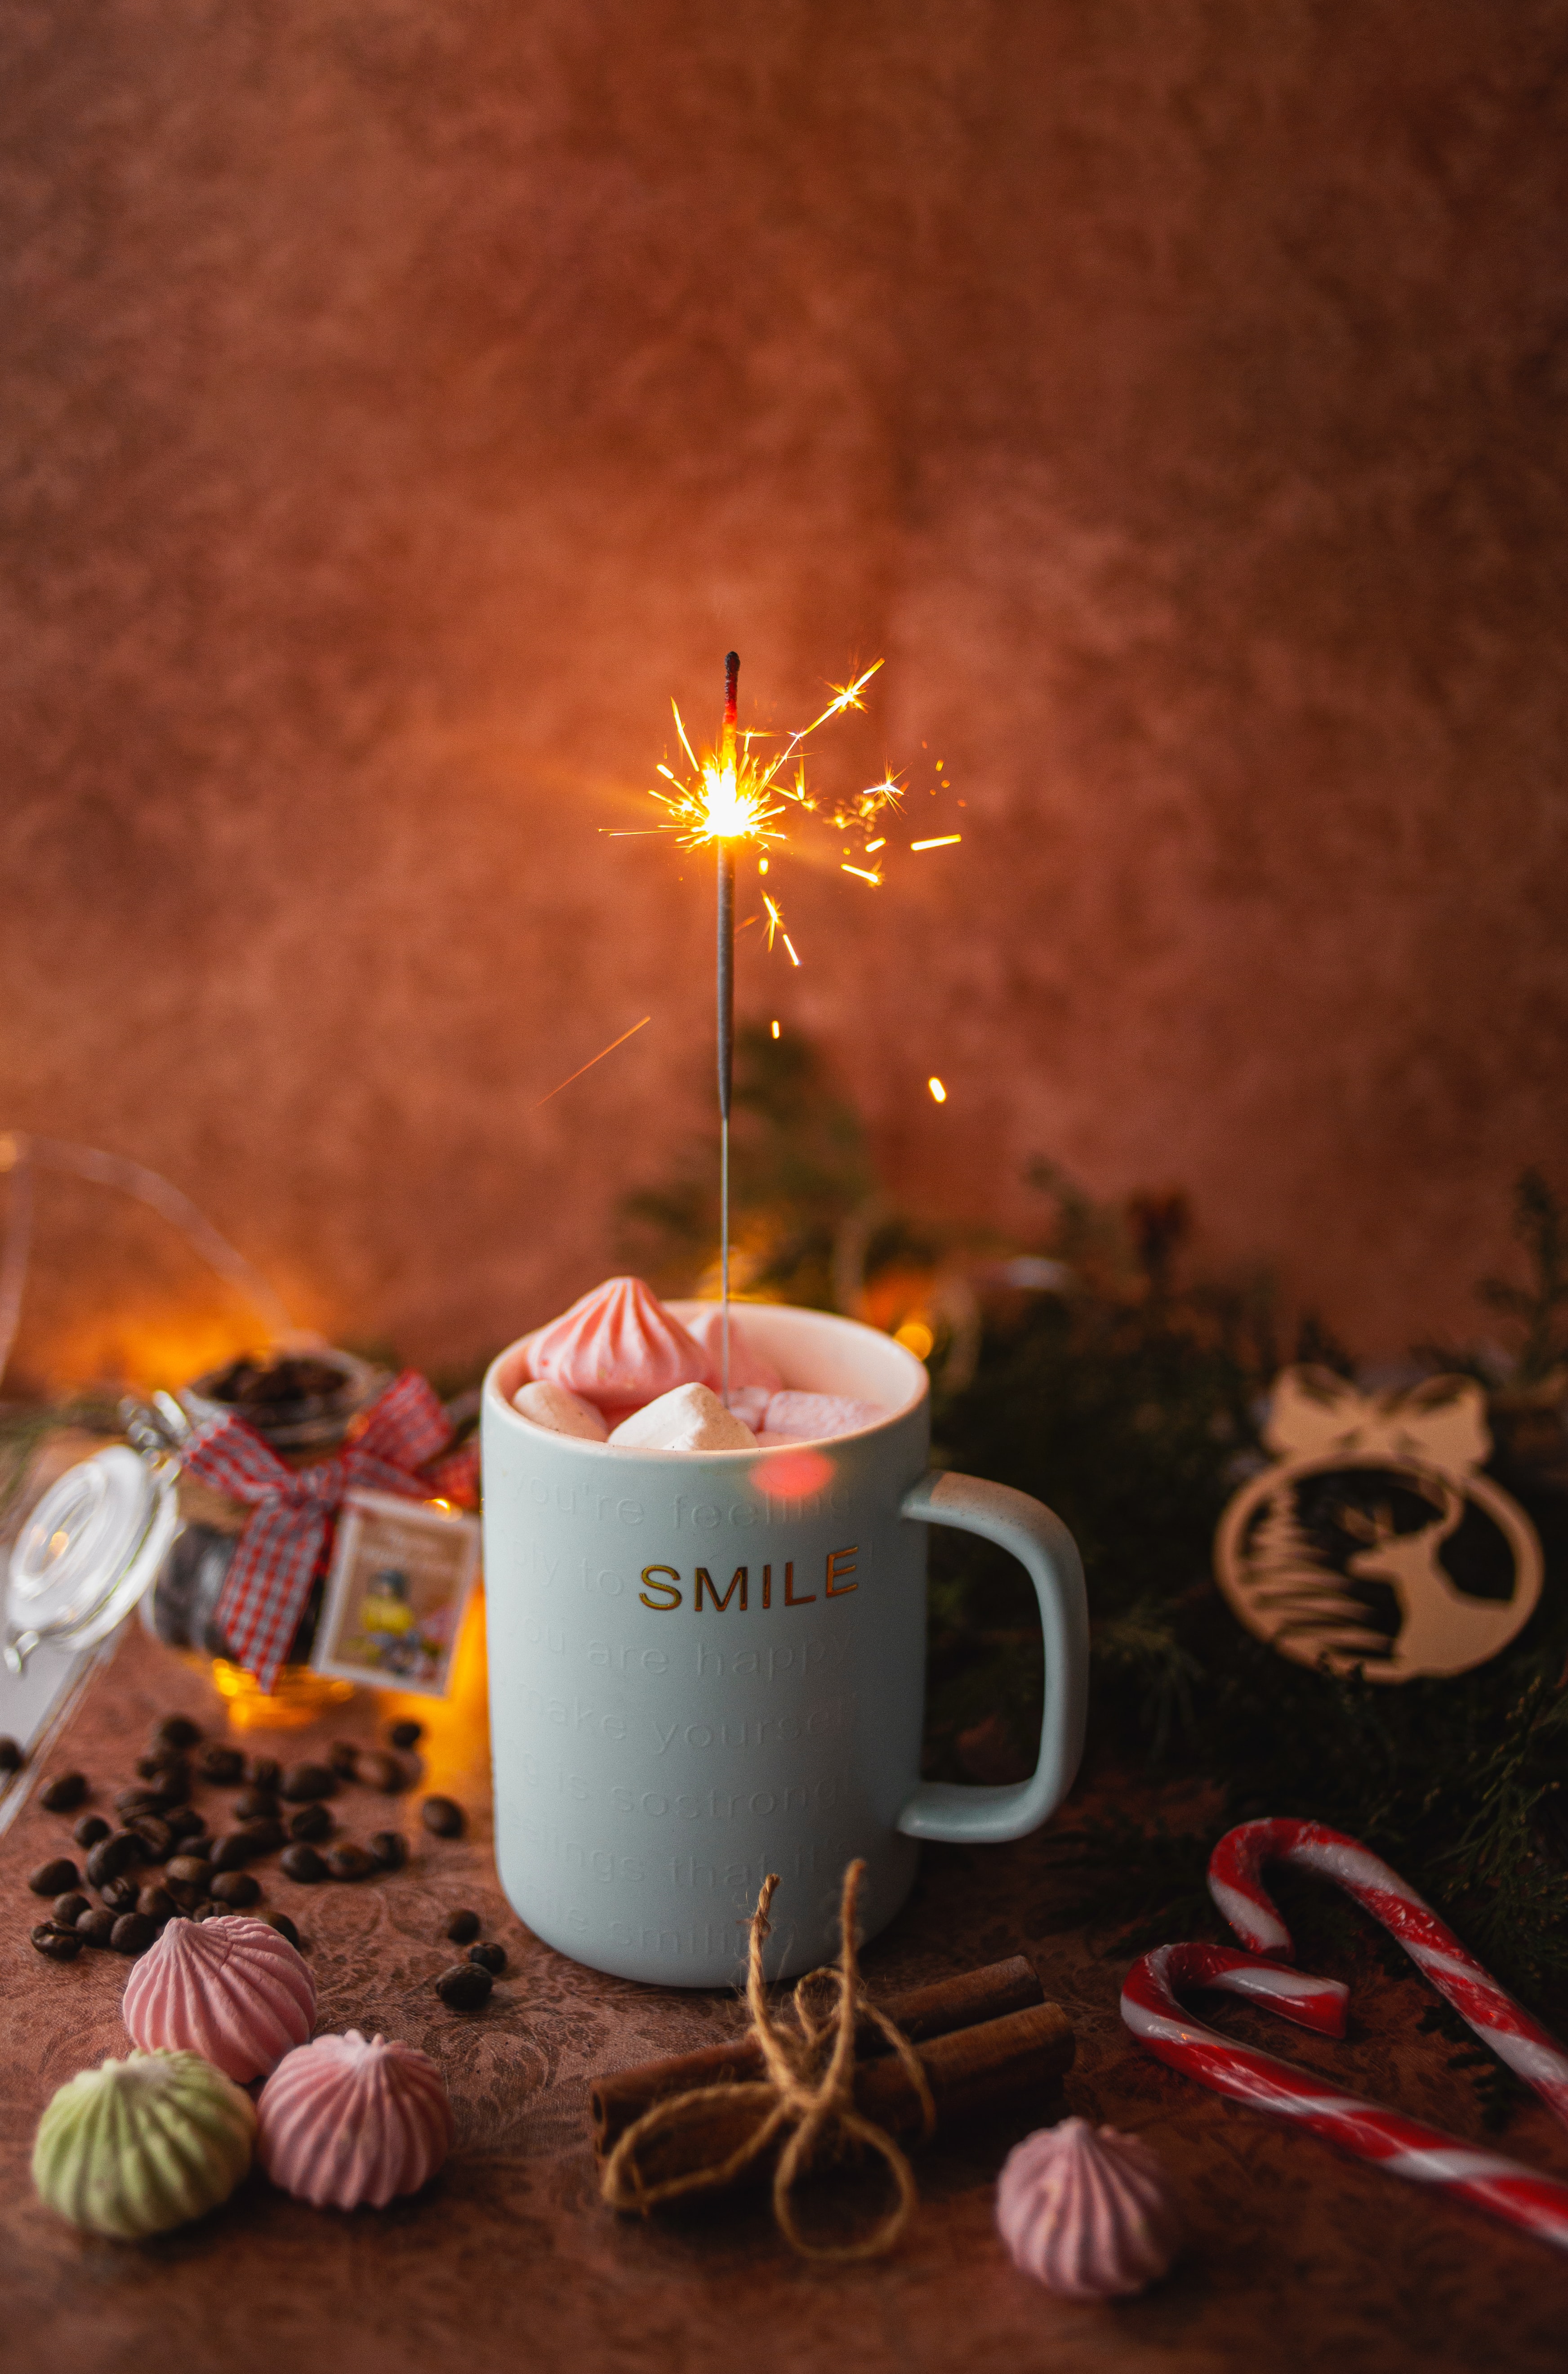 mug, miscellanea, cup, holiday, sparks, miscellaneous, marshmallow, bengal lights, sparklers, zephyr mobile wallpaper